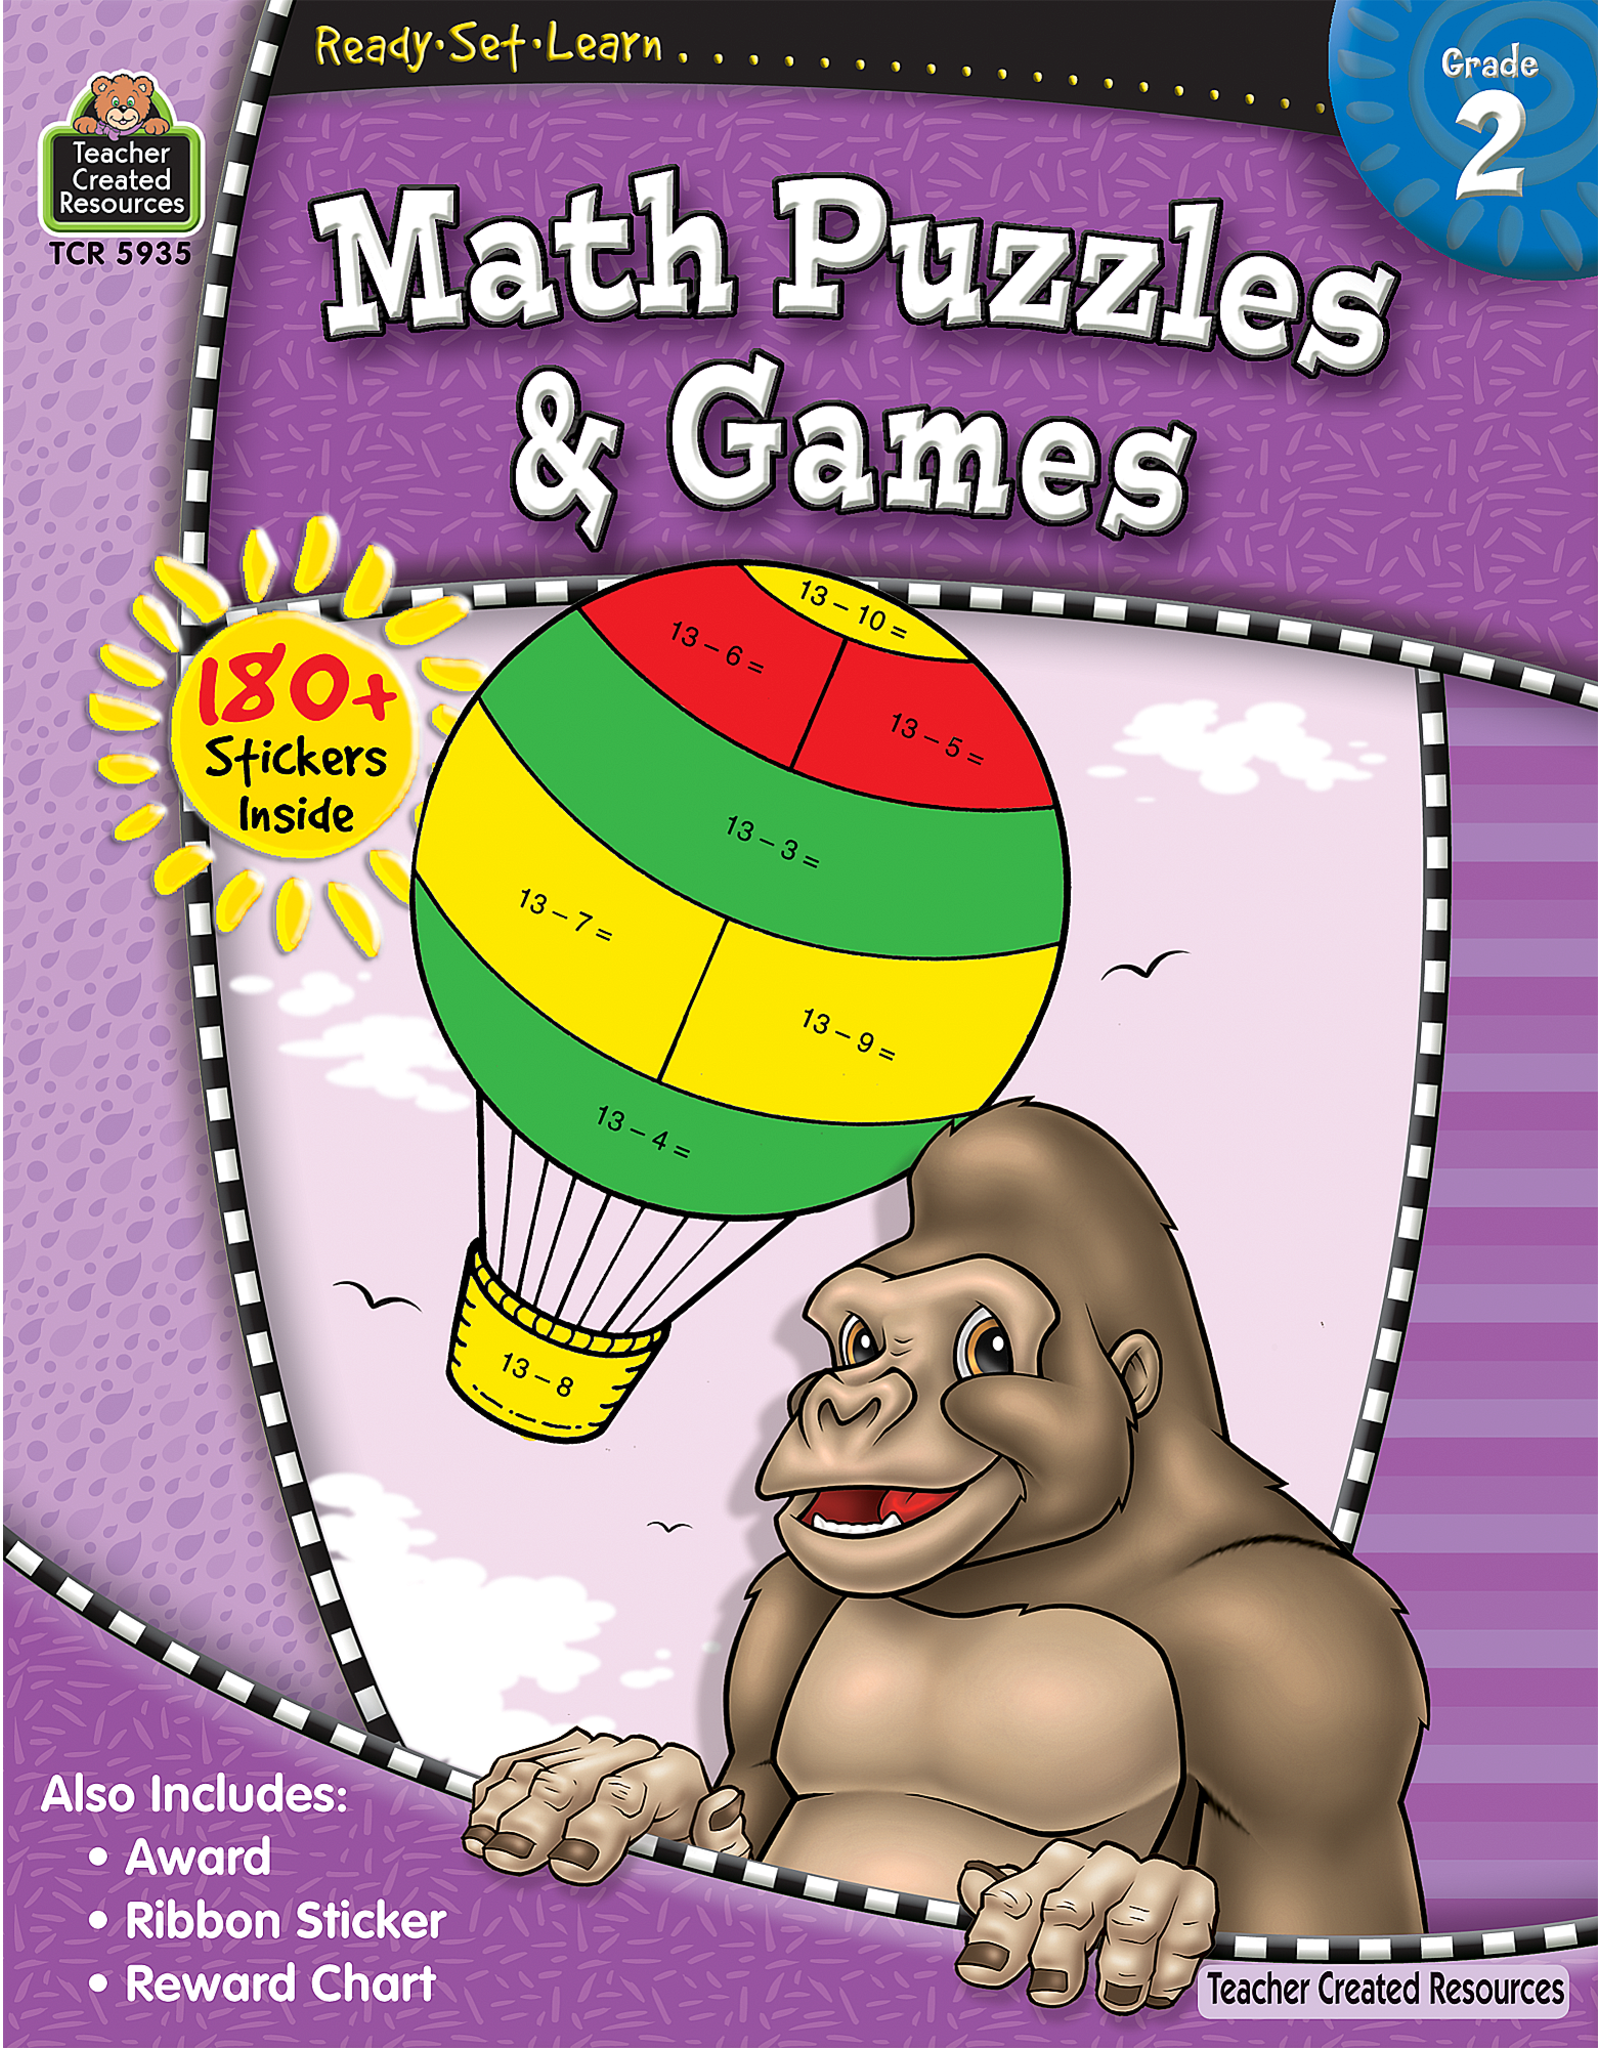 Second Grade Math Puzzles and Games